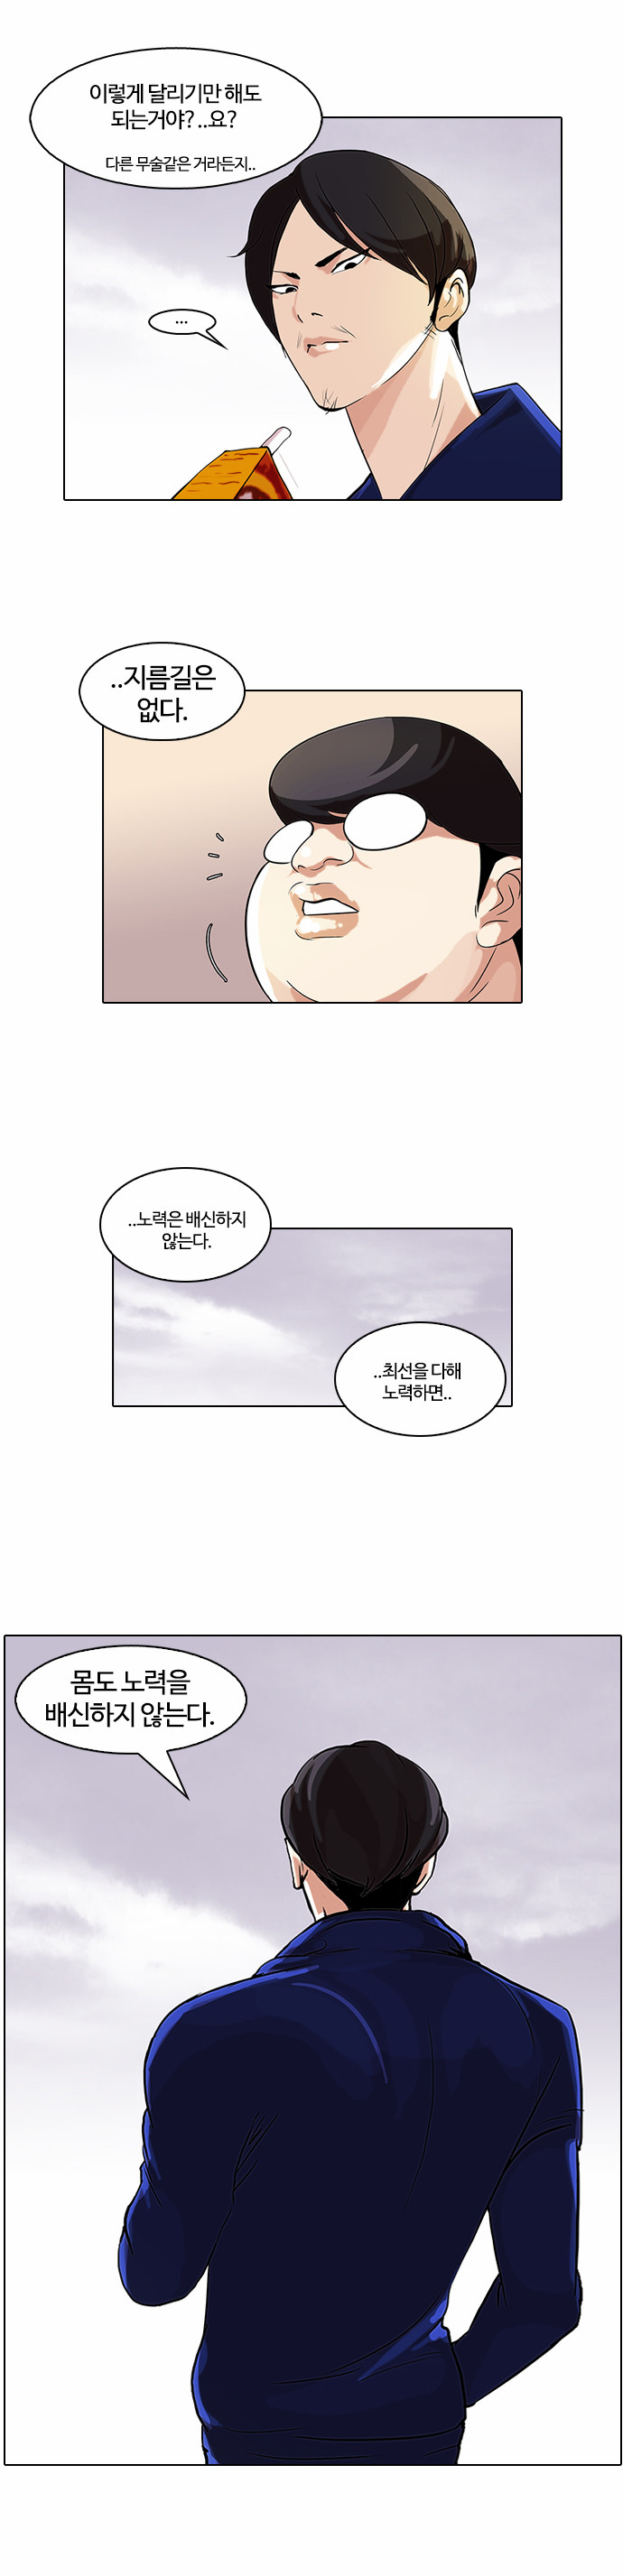 Lookism - Chapter 51 - Page 4